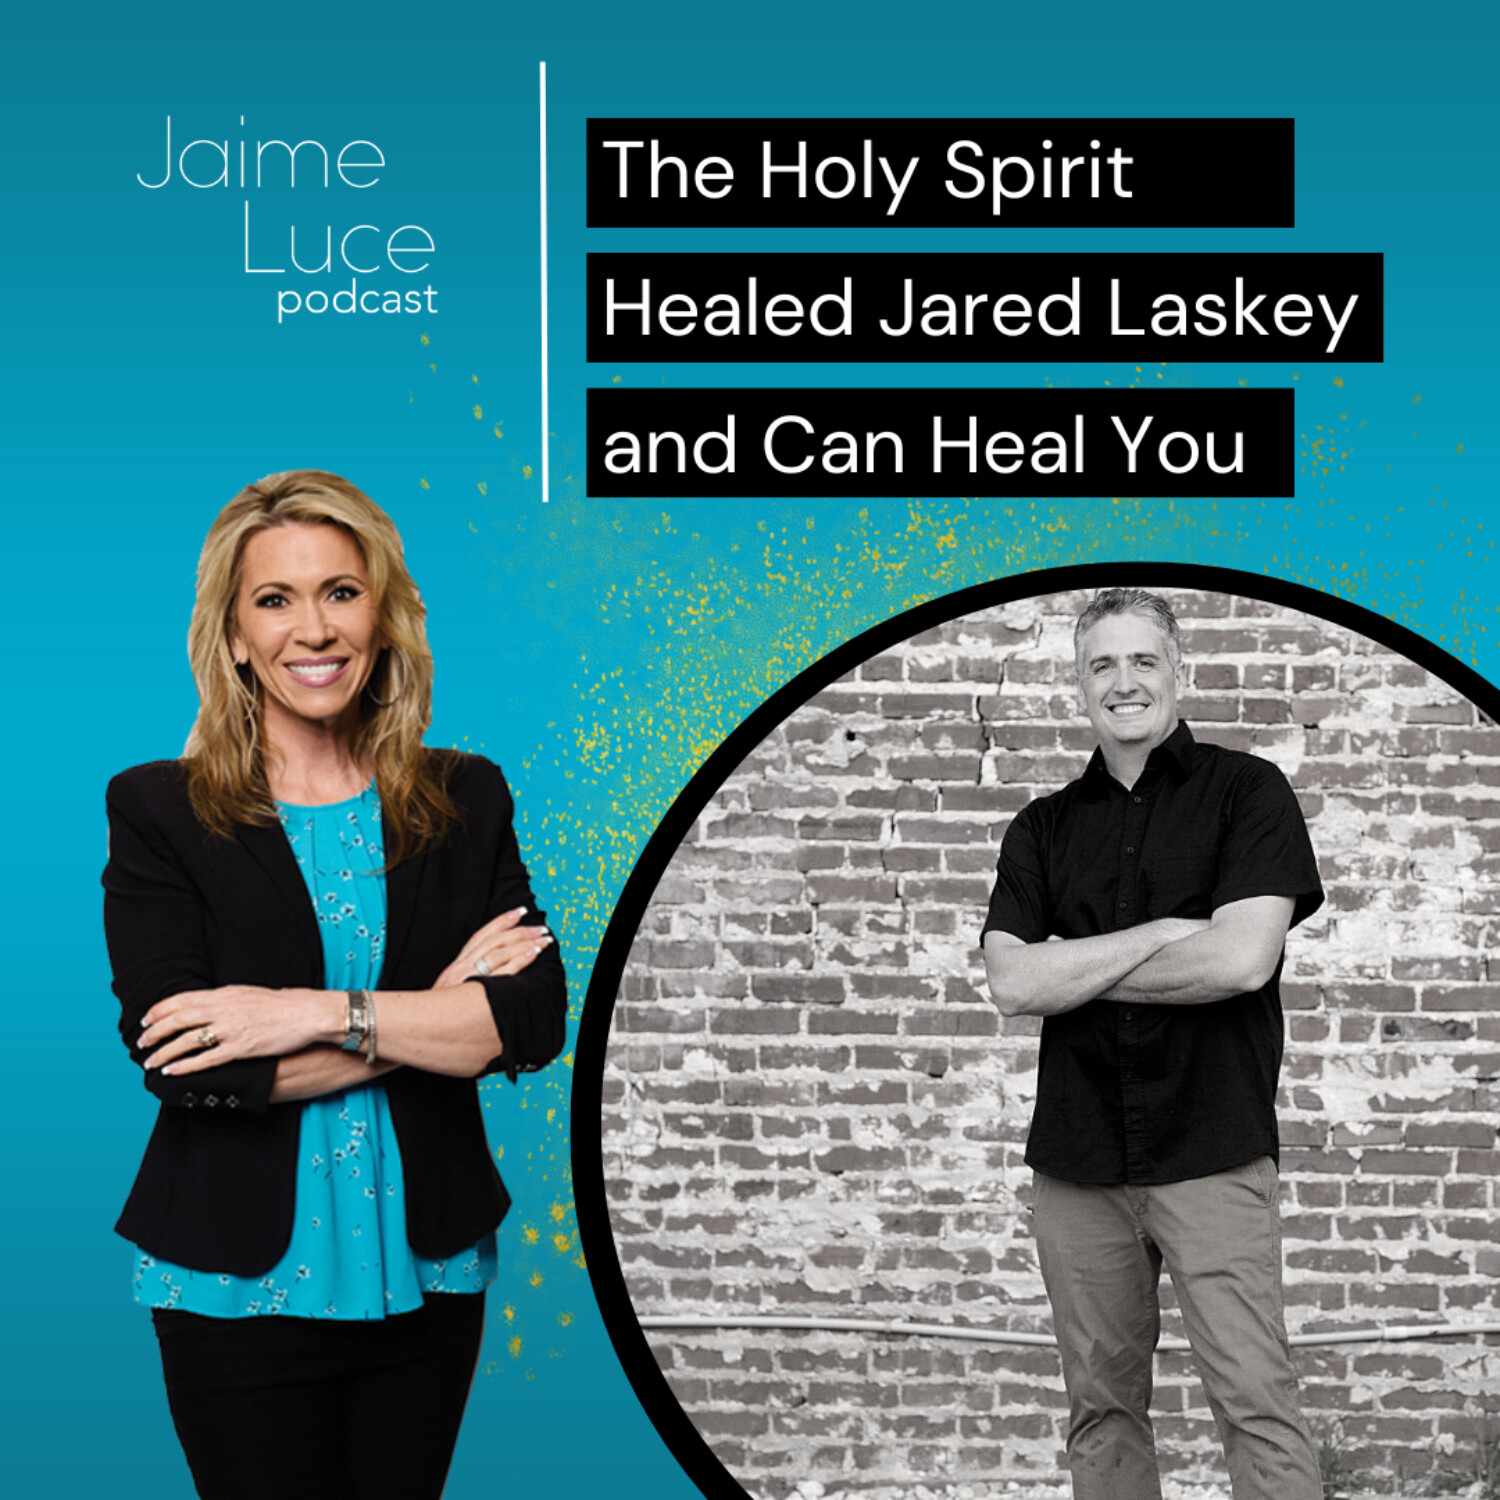 The Holy Spirit Healed Jared Laskey and Can Heal You